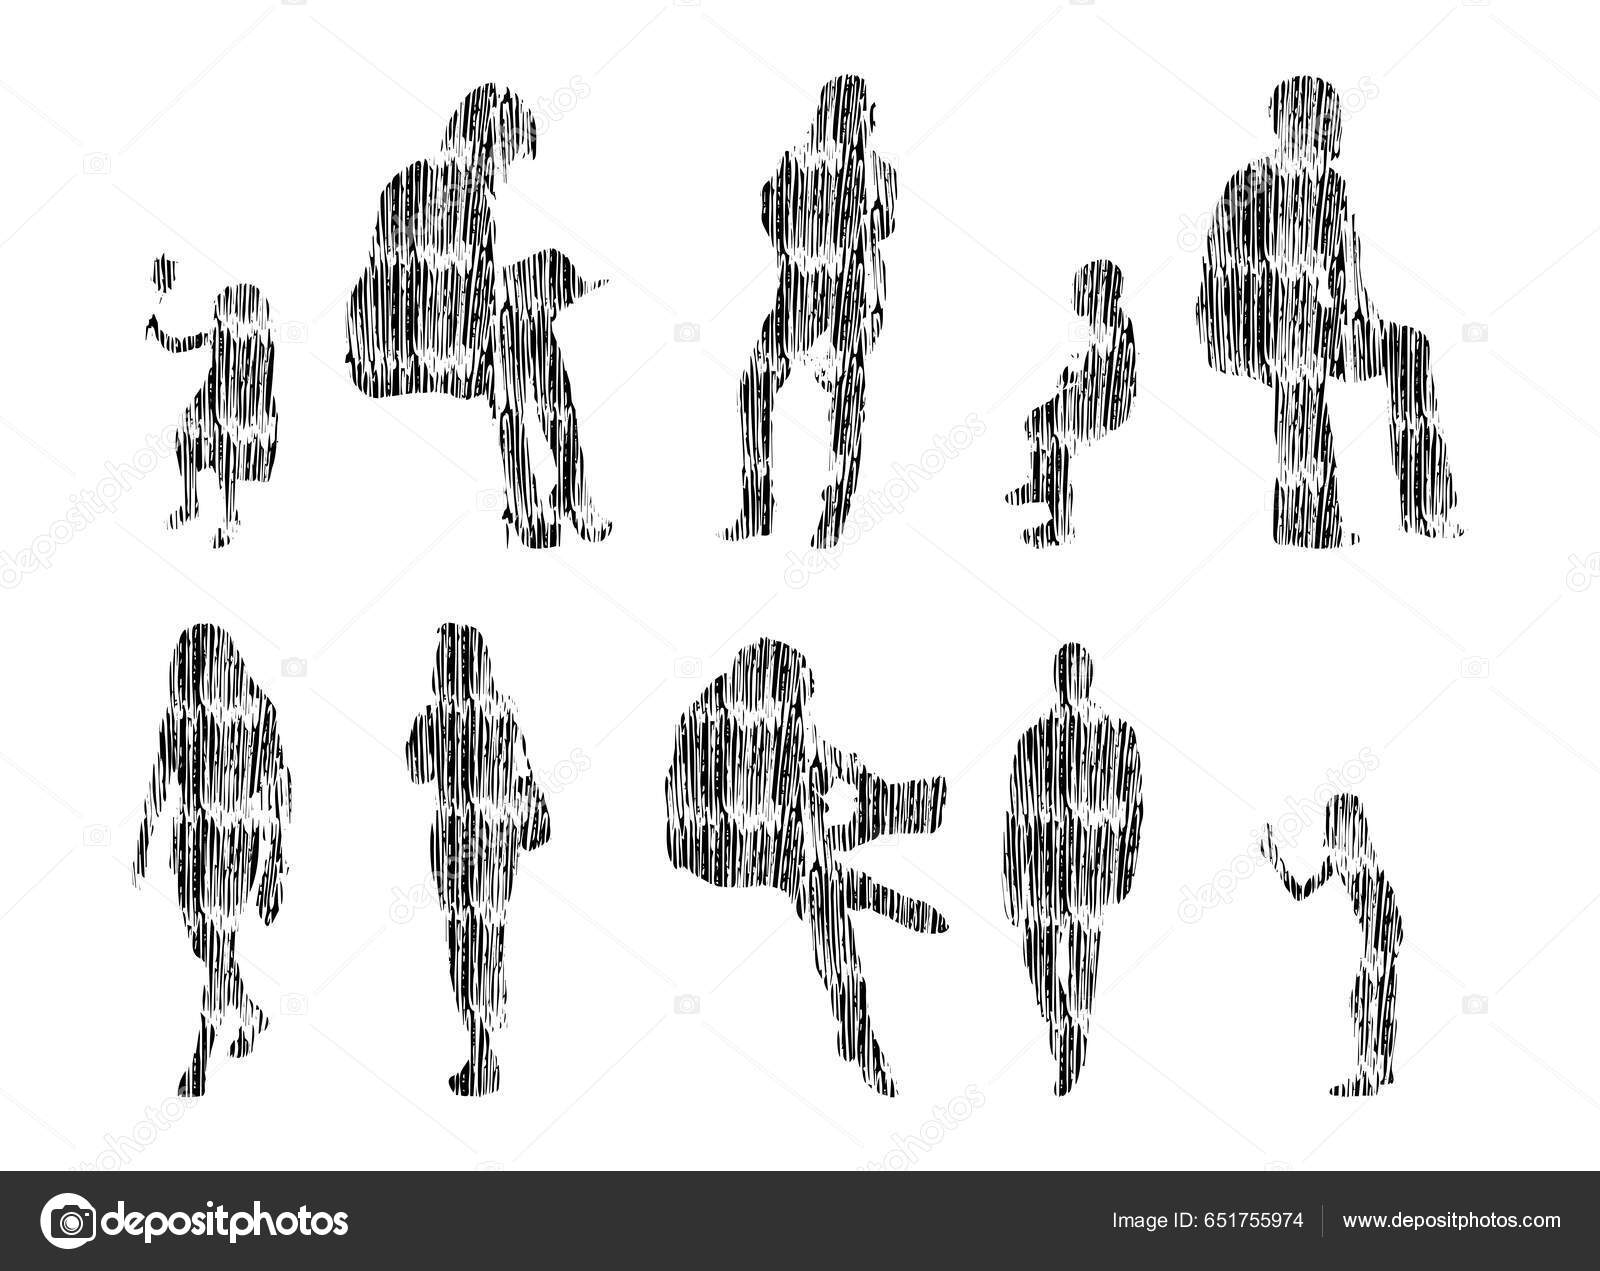 Human silhouette Vectors & Illustrations for Free Download